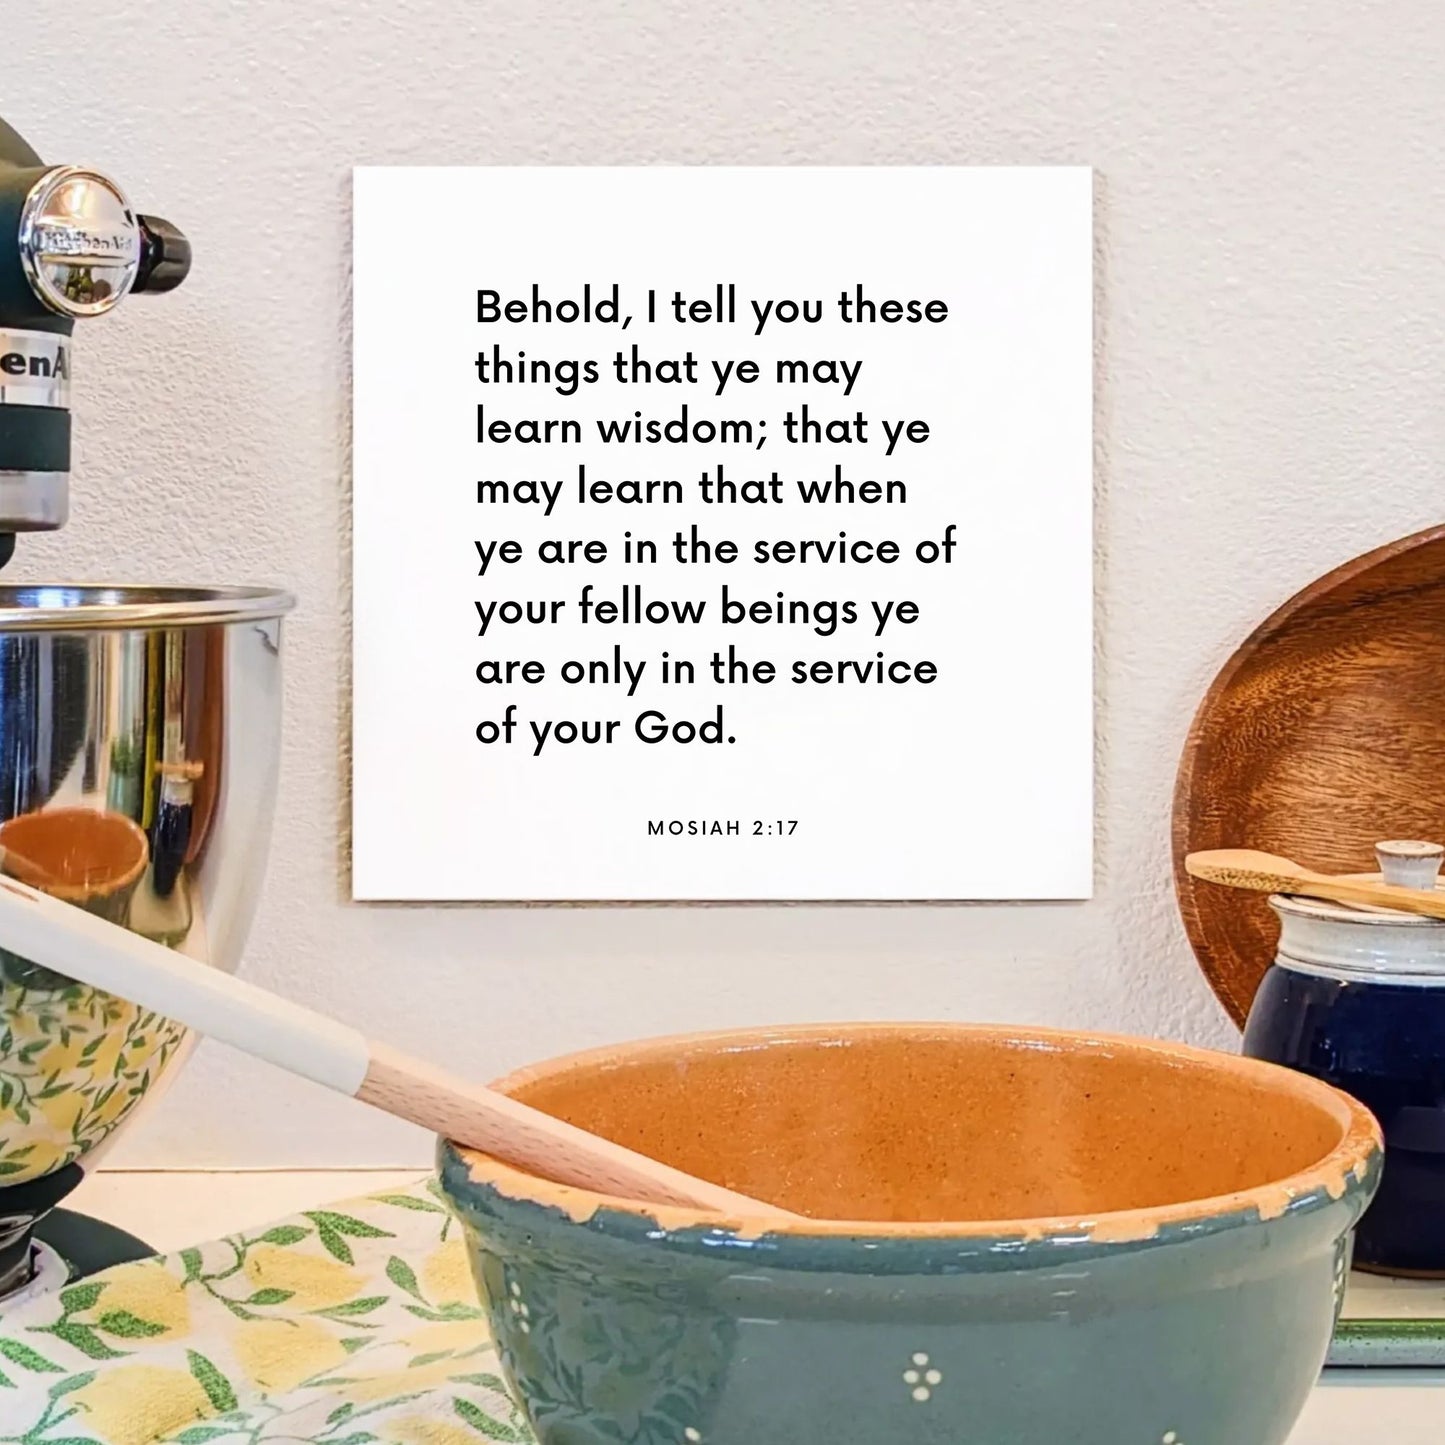 Kitchen mouting of the scripture tile for Mosiah 2:17 - "When ye are in the service of your fellow beings"